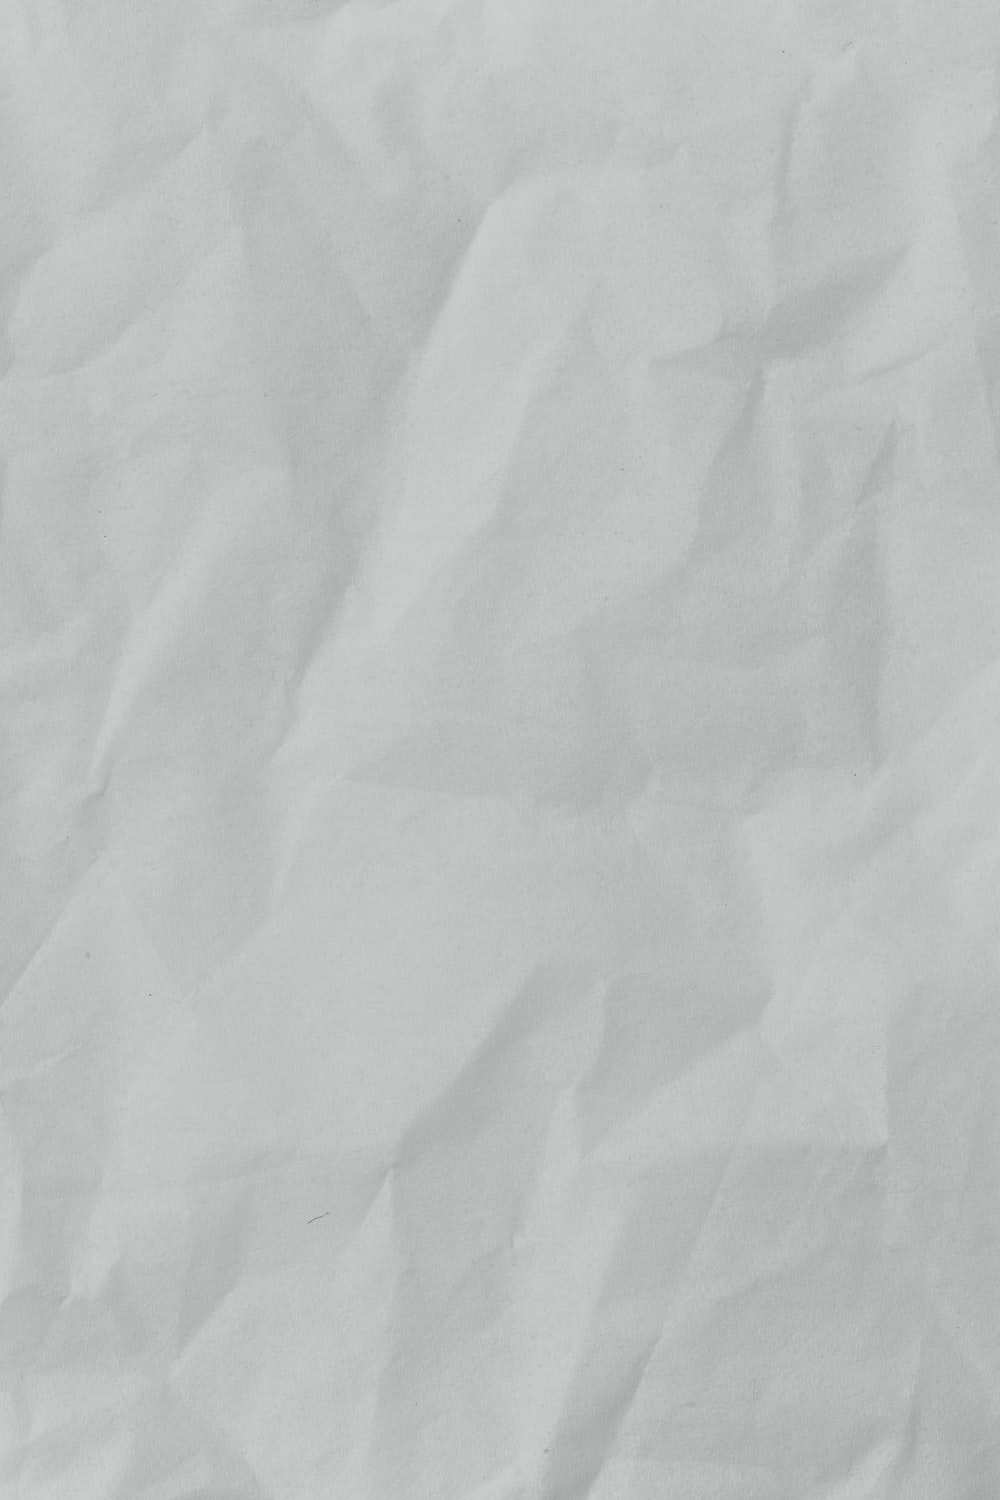 Paper Texture Pictures HD Image